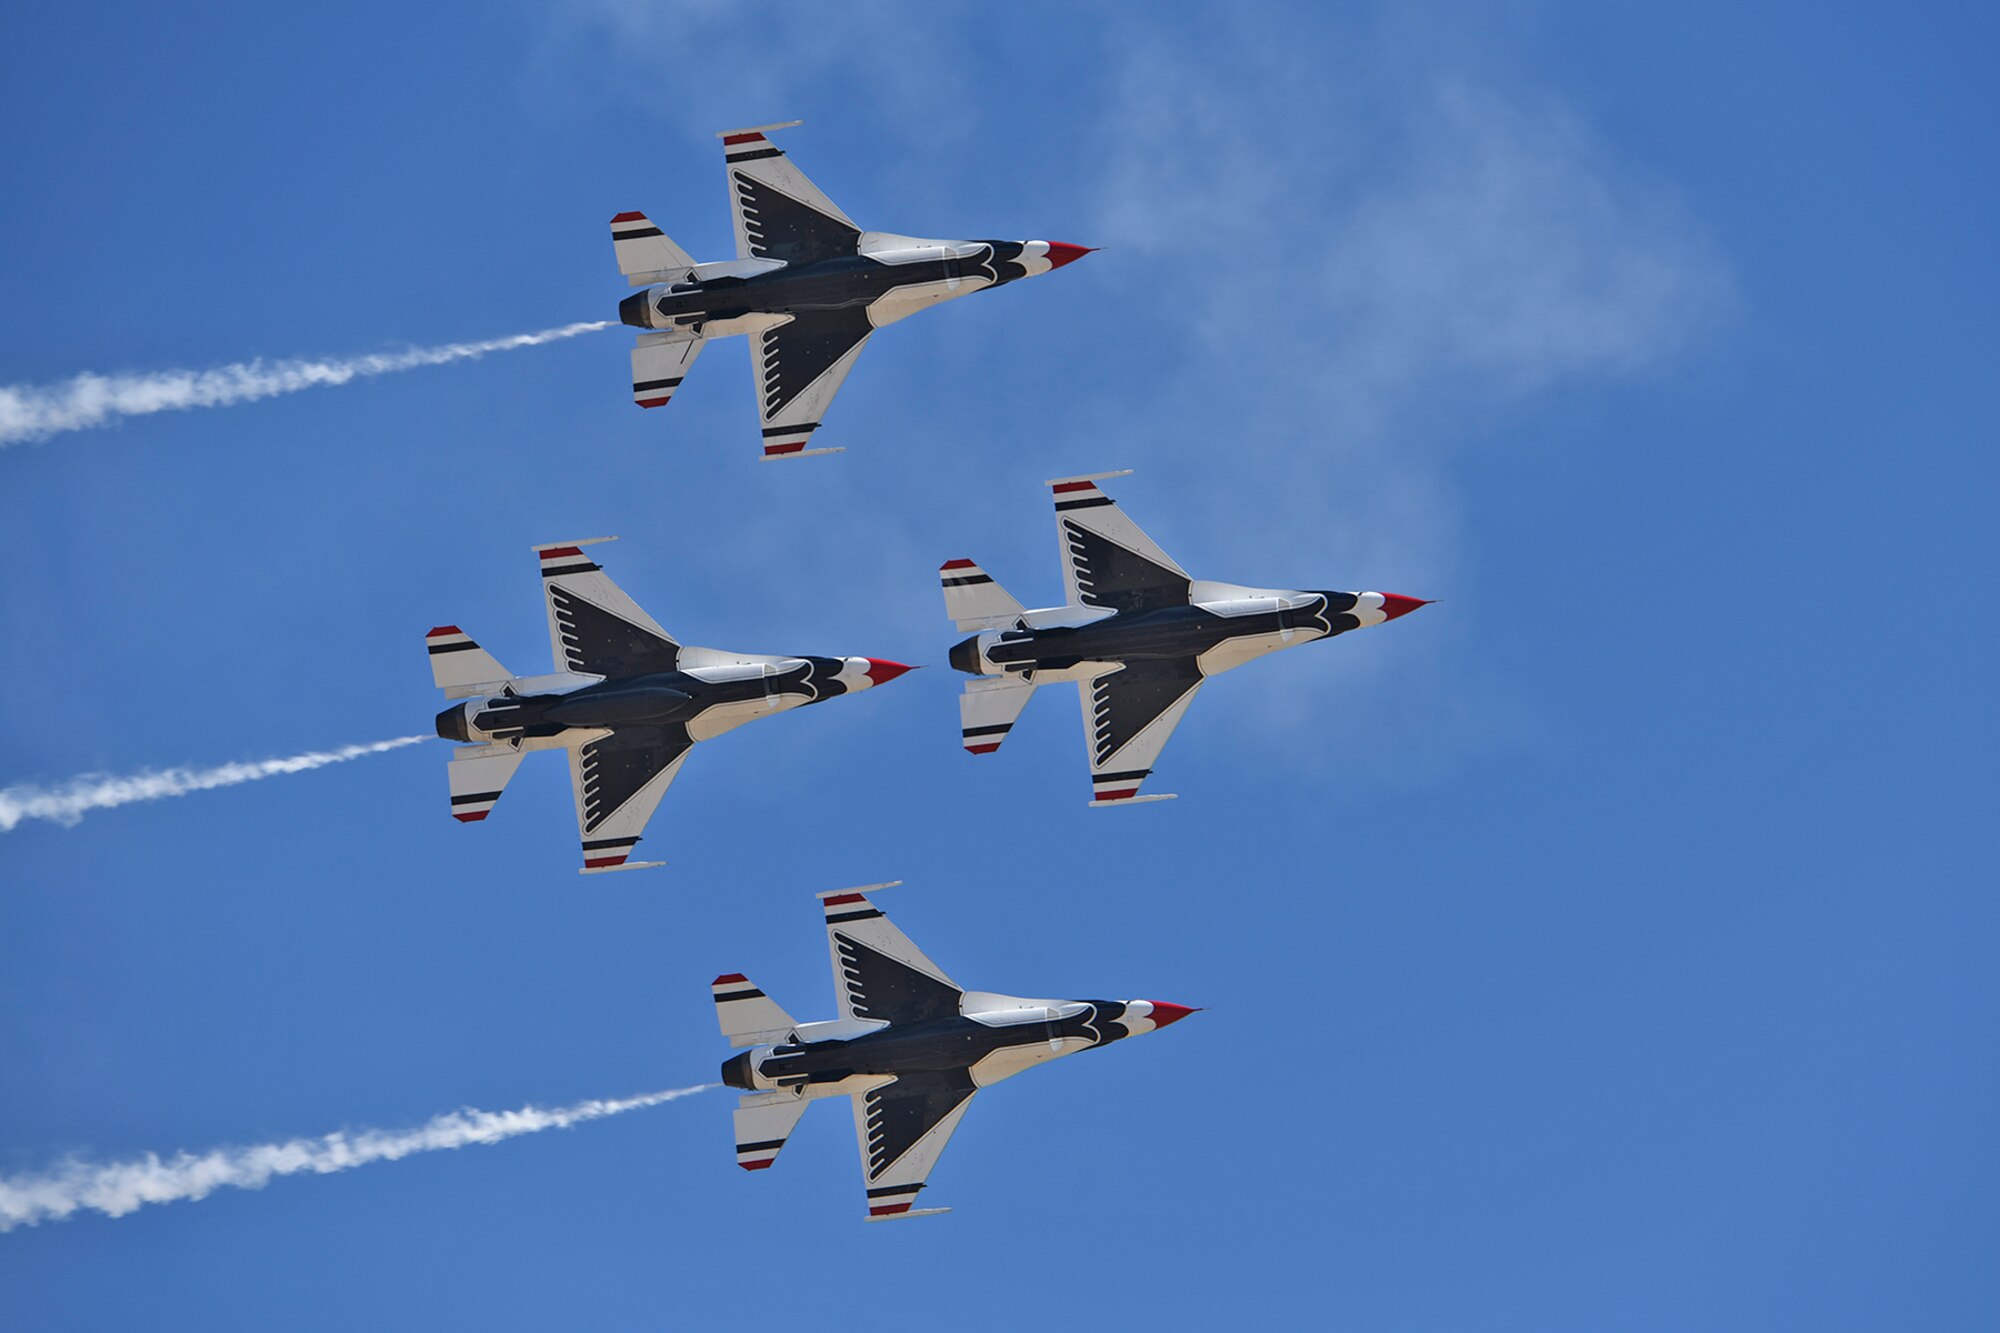 The U.S. Air Force Thunderbirds perform for the Inland Northwest community during the 2017 Skyfest Air Show and Open House July 30, 2017, at Fairchild Air Force Base, Washington. The Thunderbirds have flown the F-16 Fighting Falcon since August 1982, more than half of the team's history. (U.S. Air Force photo/Senior Airman Mackenzie Richardson)